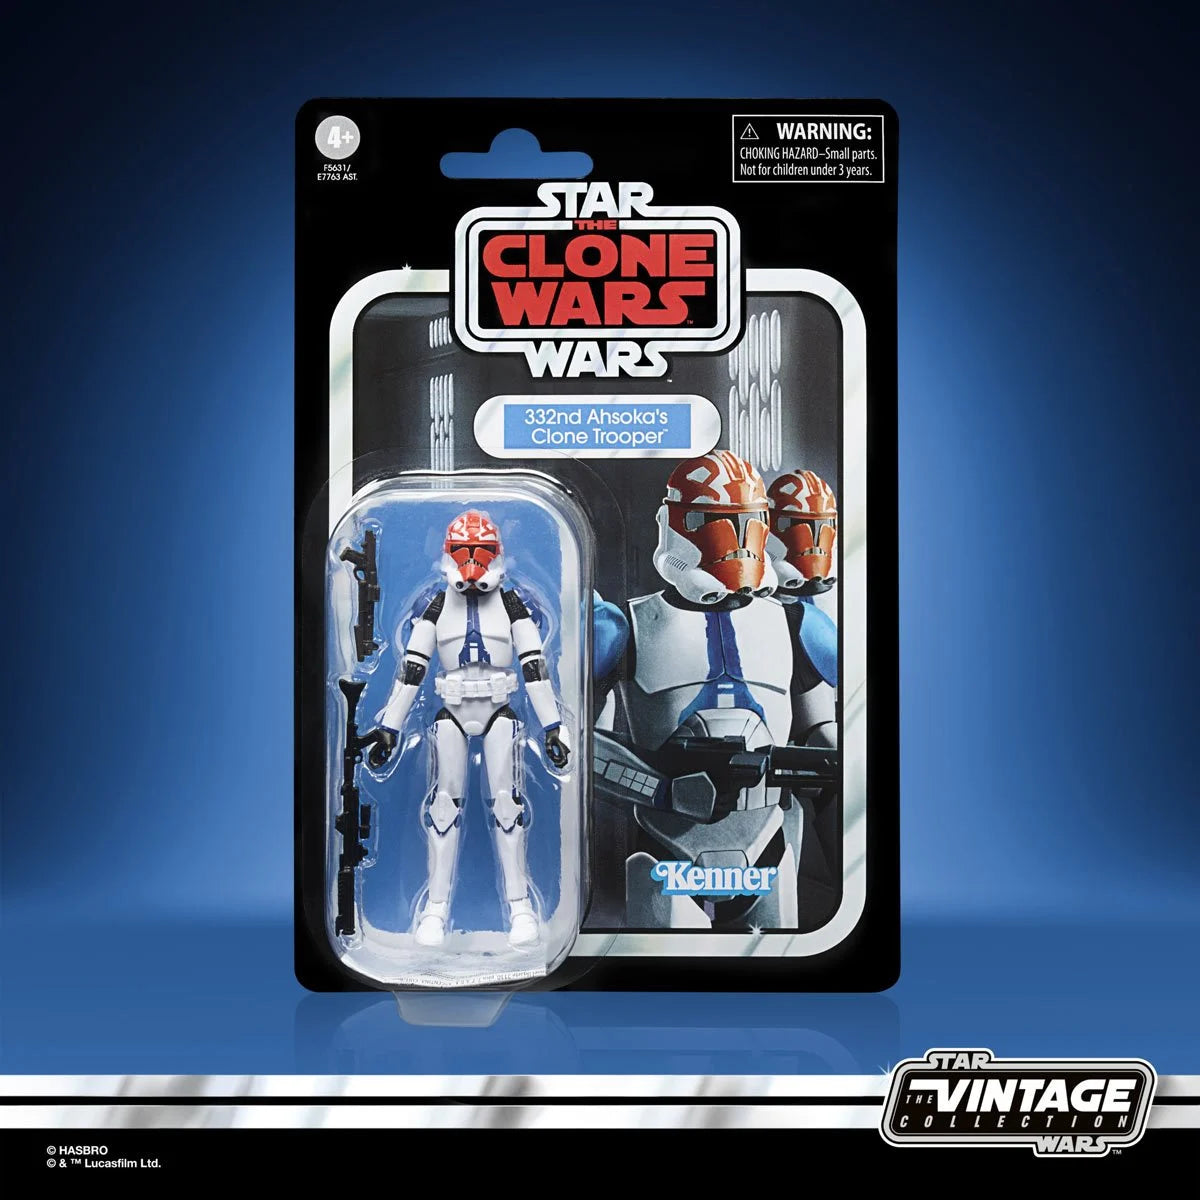 The Vintage Collection - The Clone Wars - 332nd Ahsoka's Clone Trooper